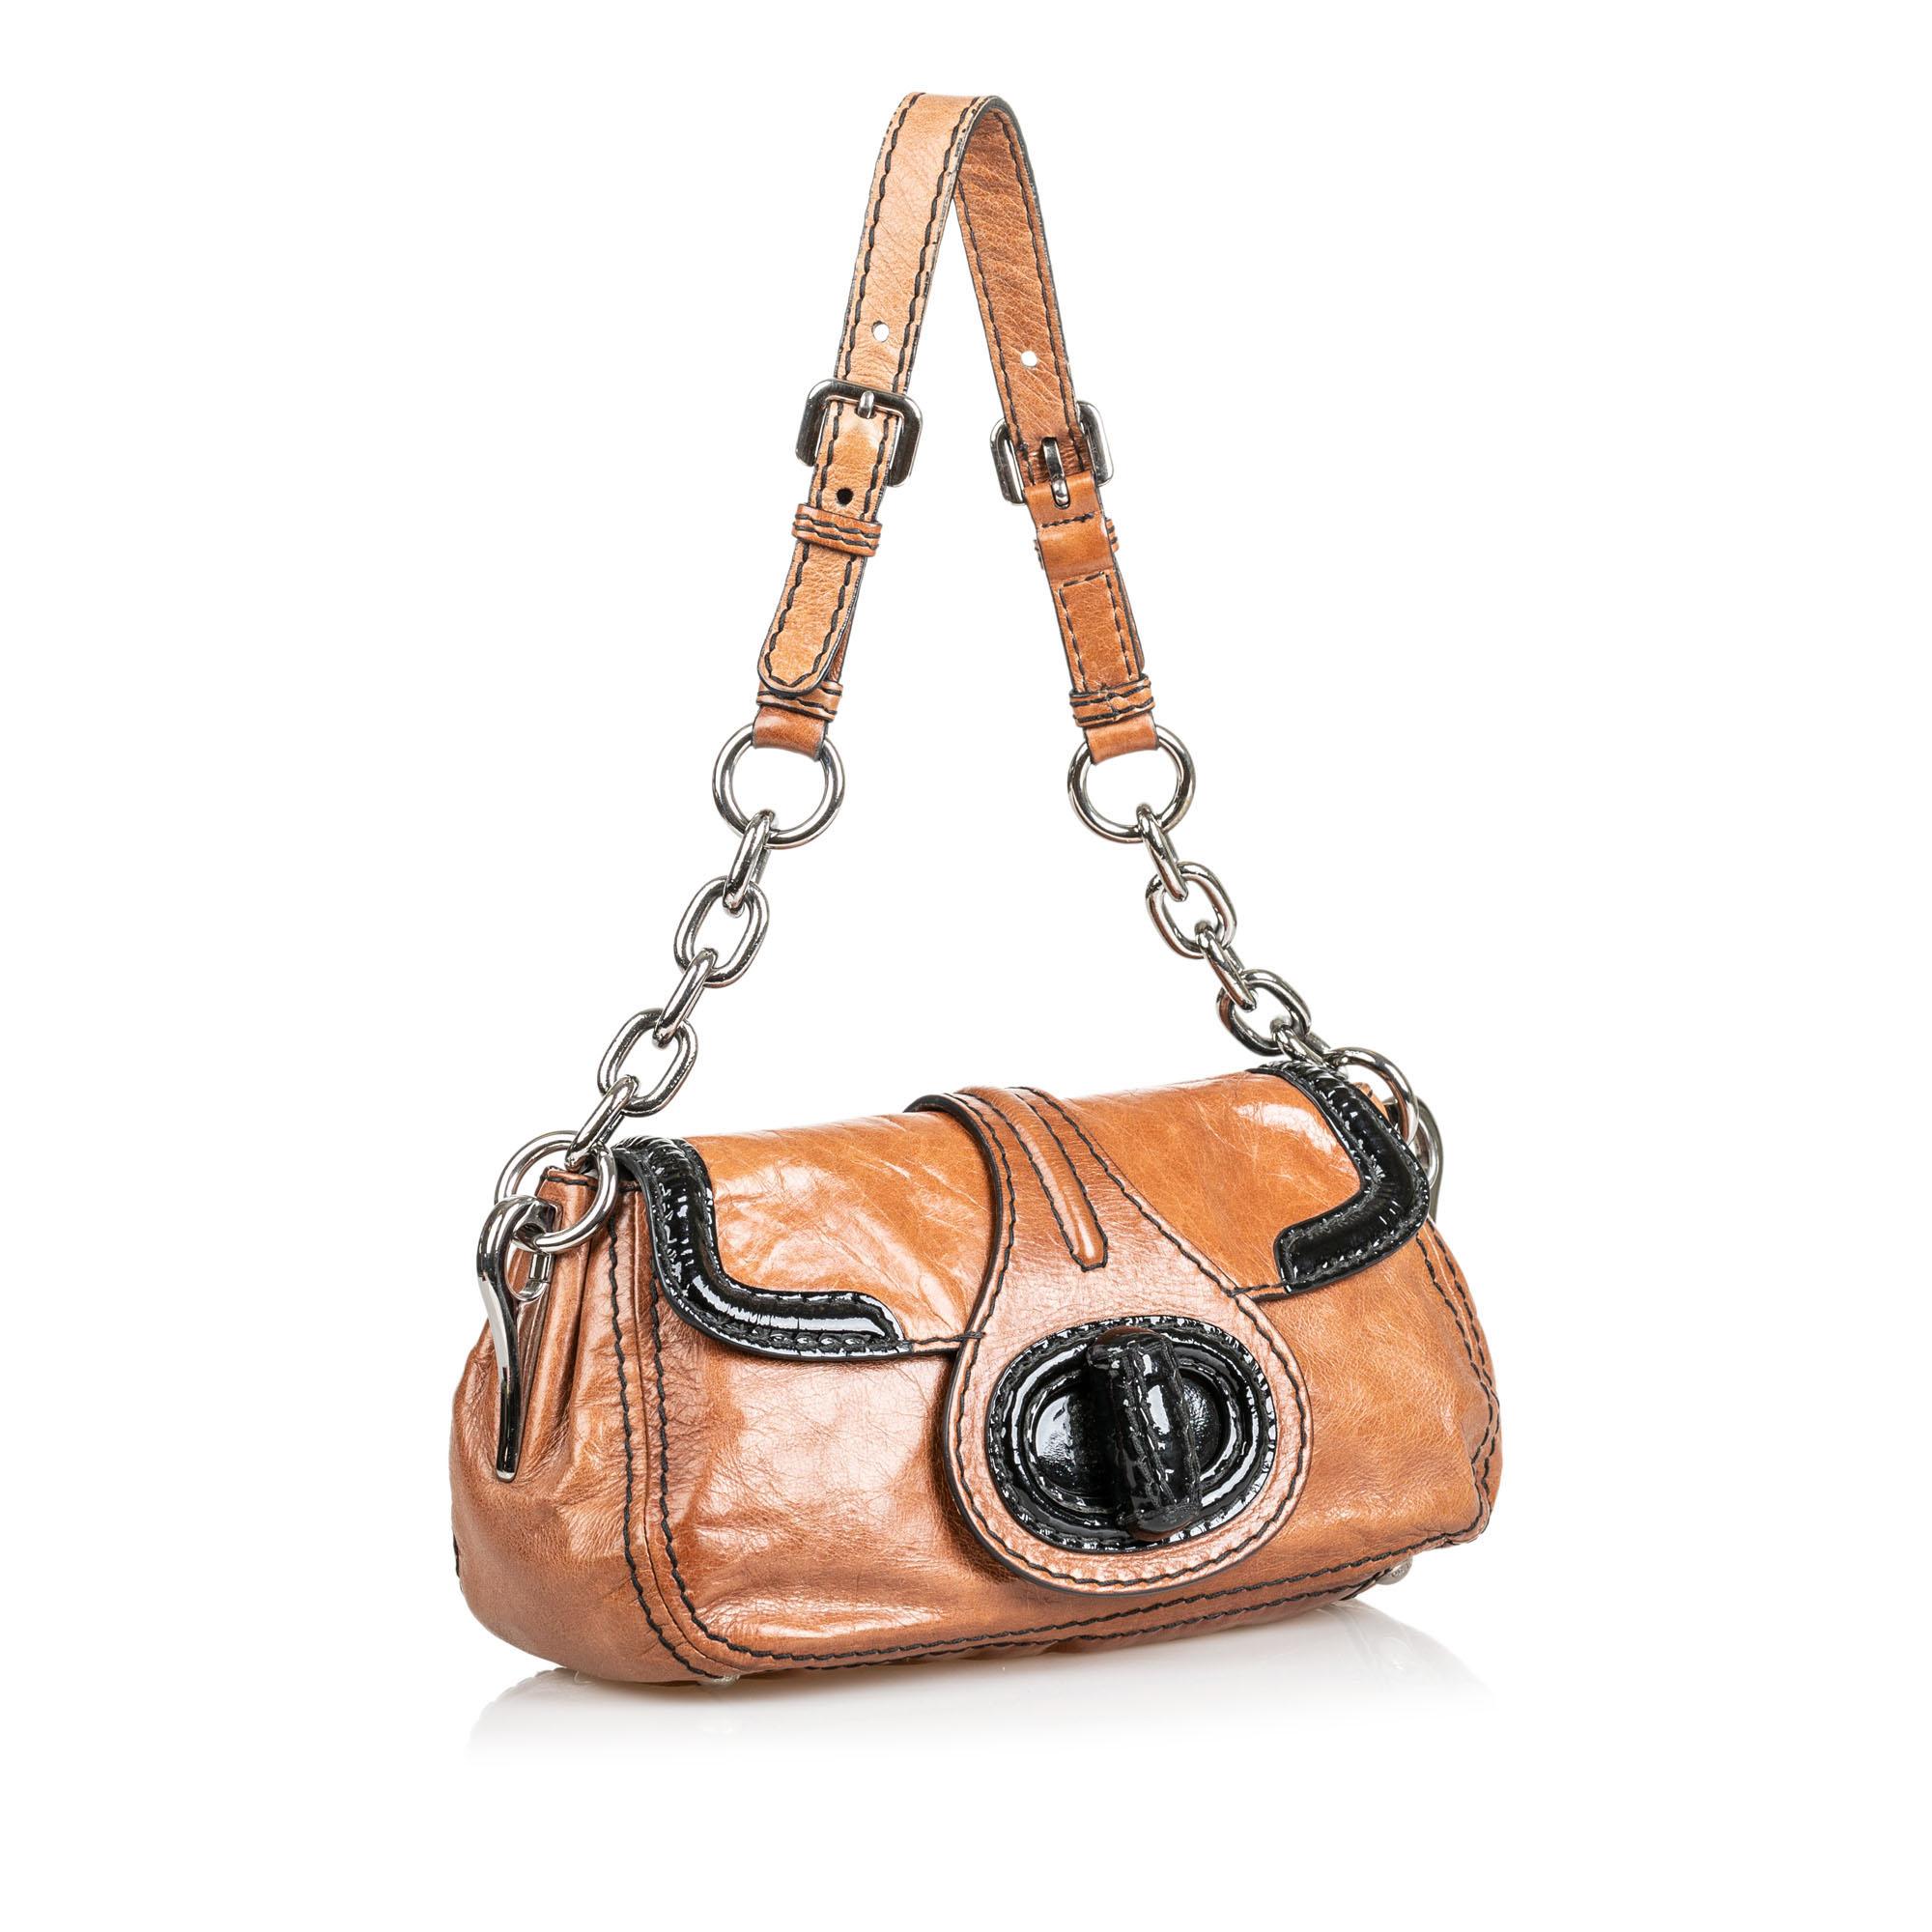 This shoulder bag features a leather body, a flat strap with silver tone chain, a top flap with turn lock closure, and interior zip and slip pockets. It carries as B condition rating.

Inclusions: 
This item does not come with